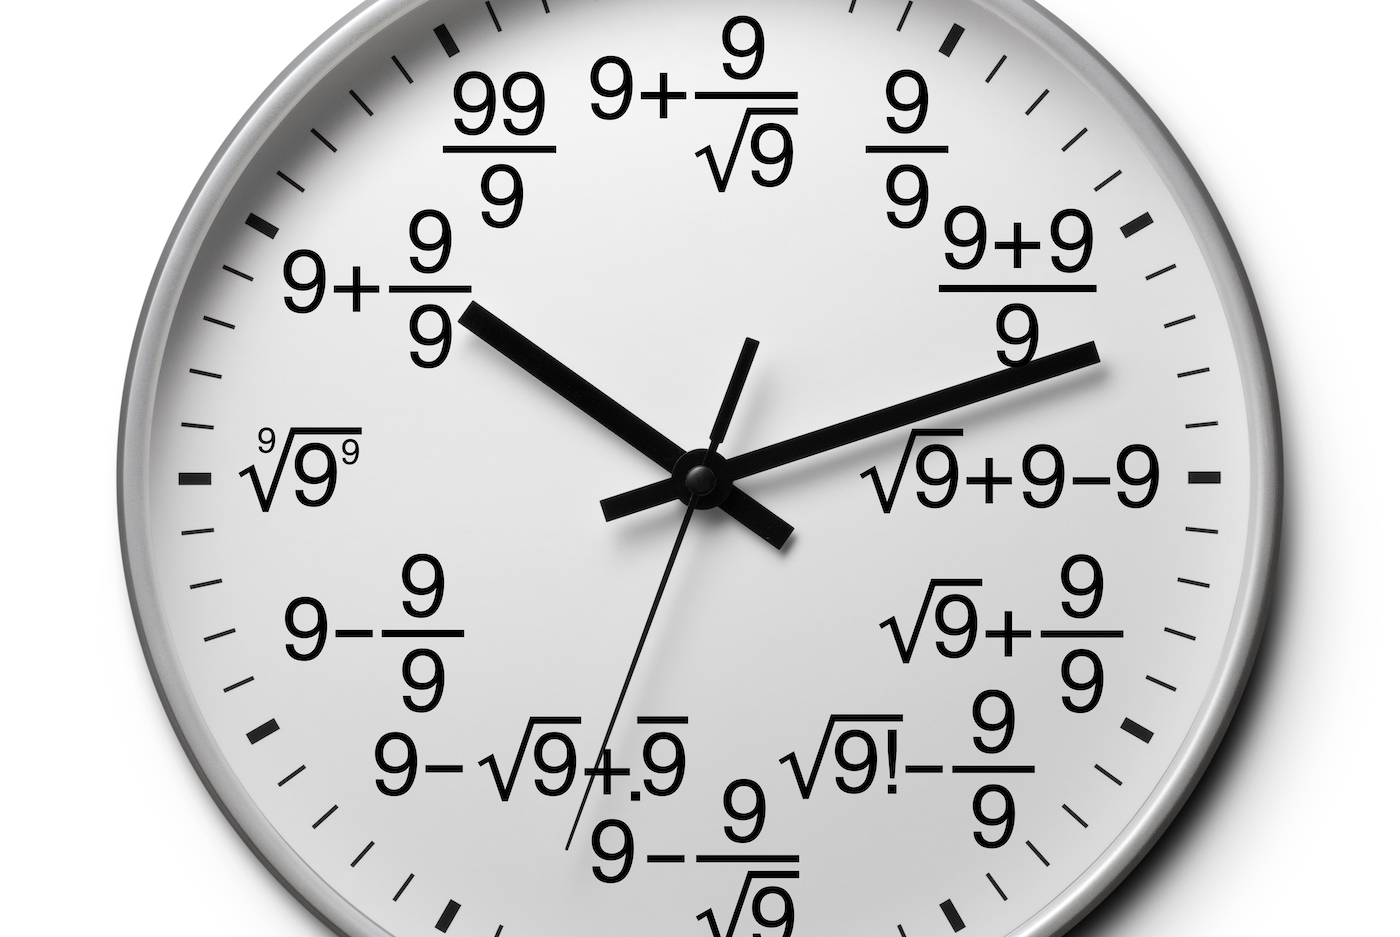 A clock face hat displays equations instead of numerals on white background.